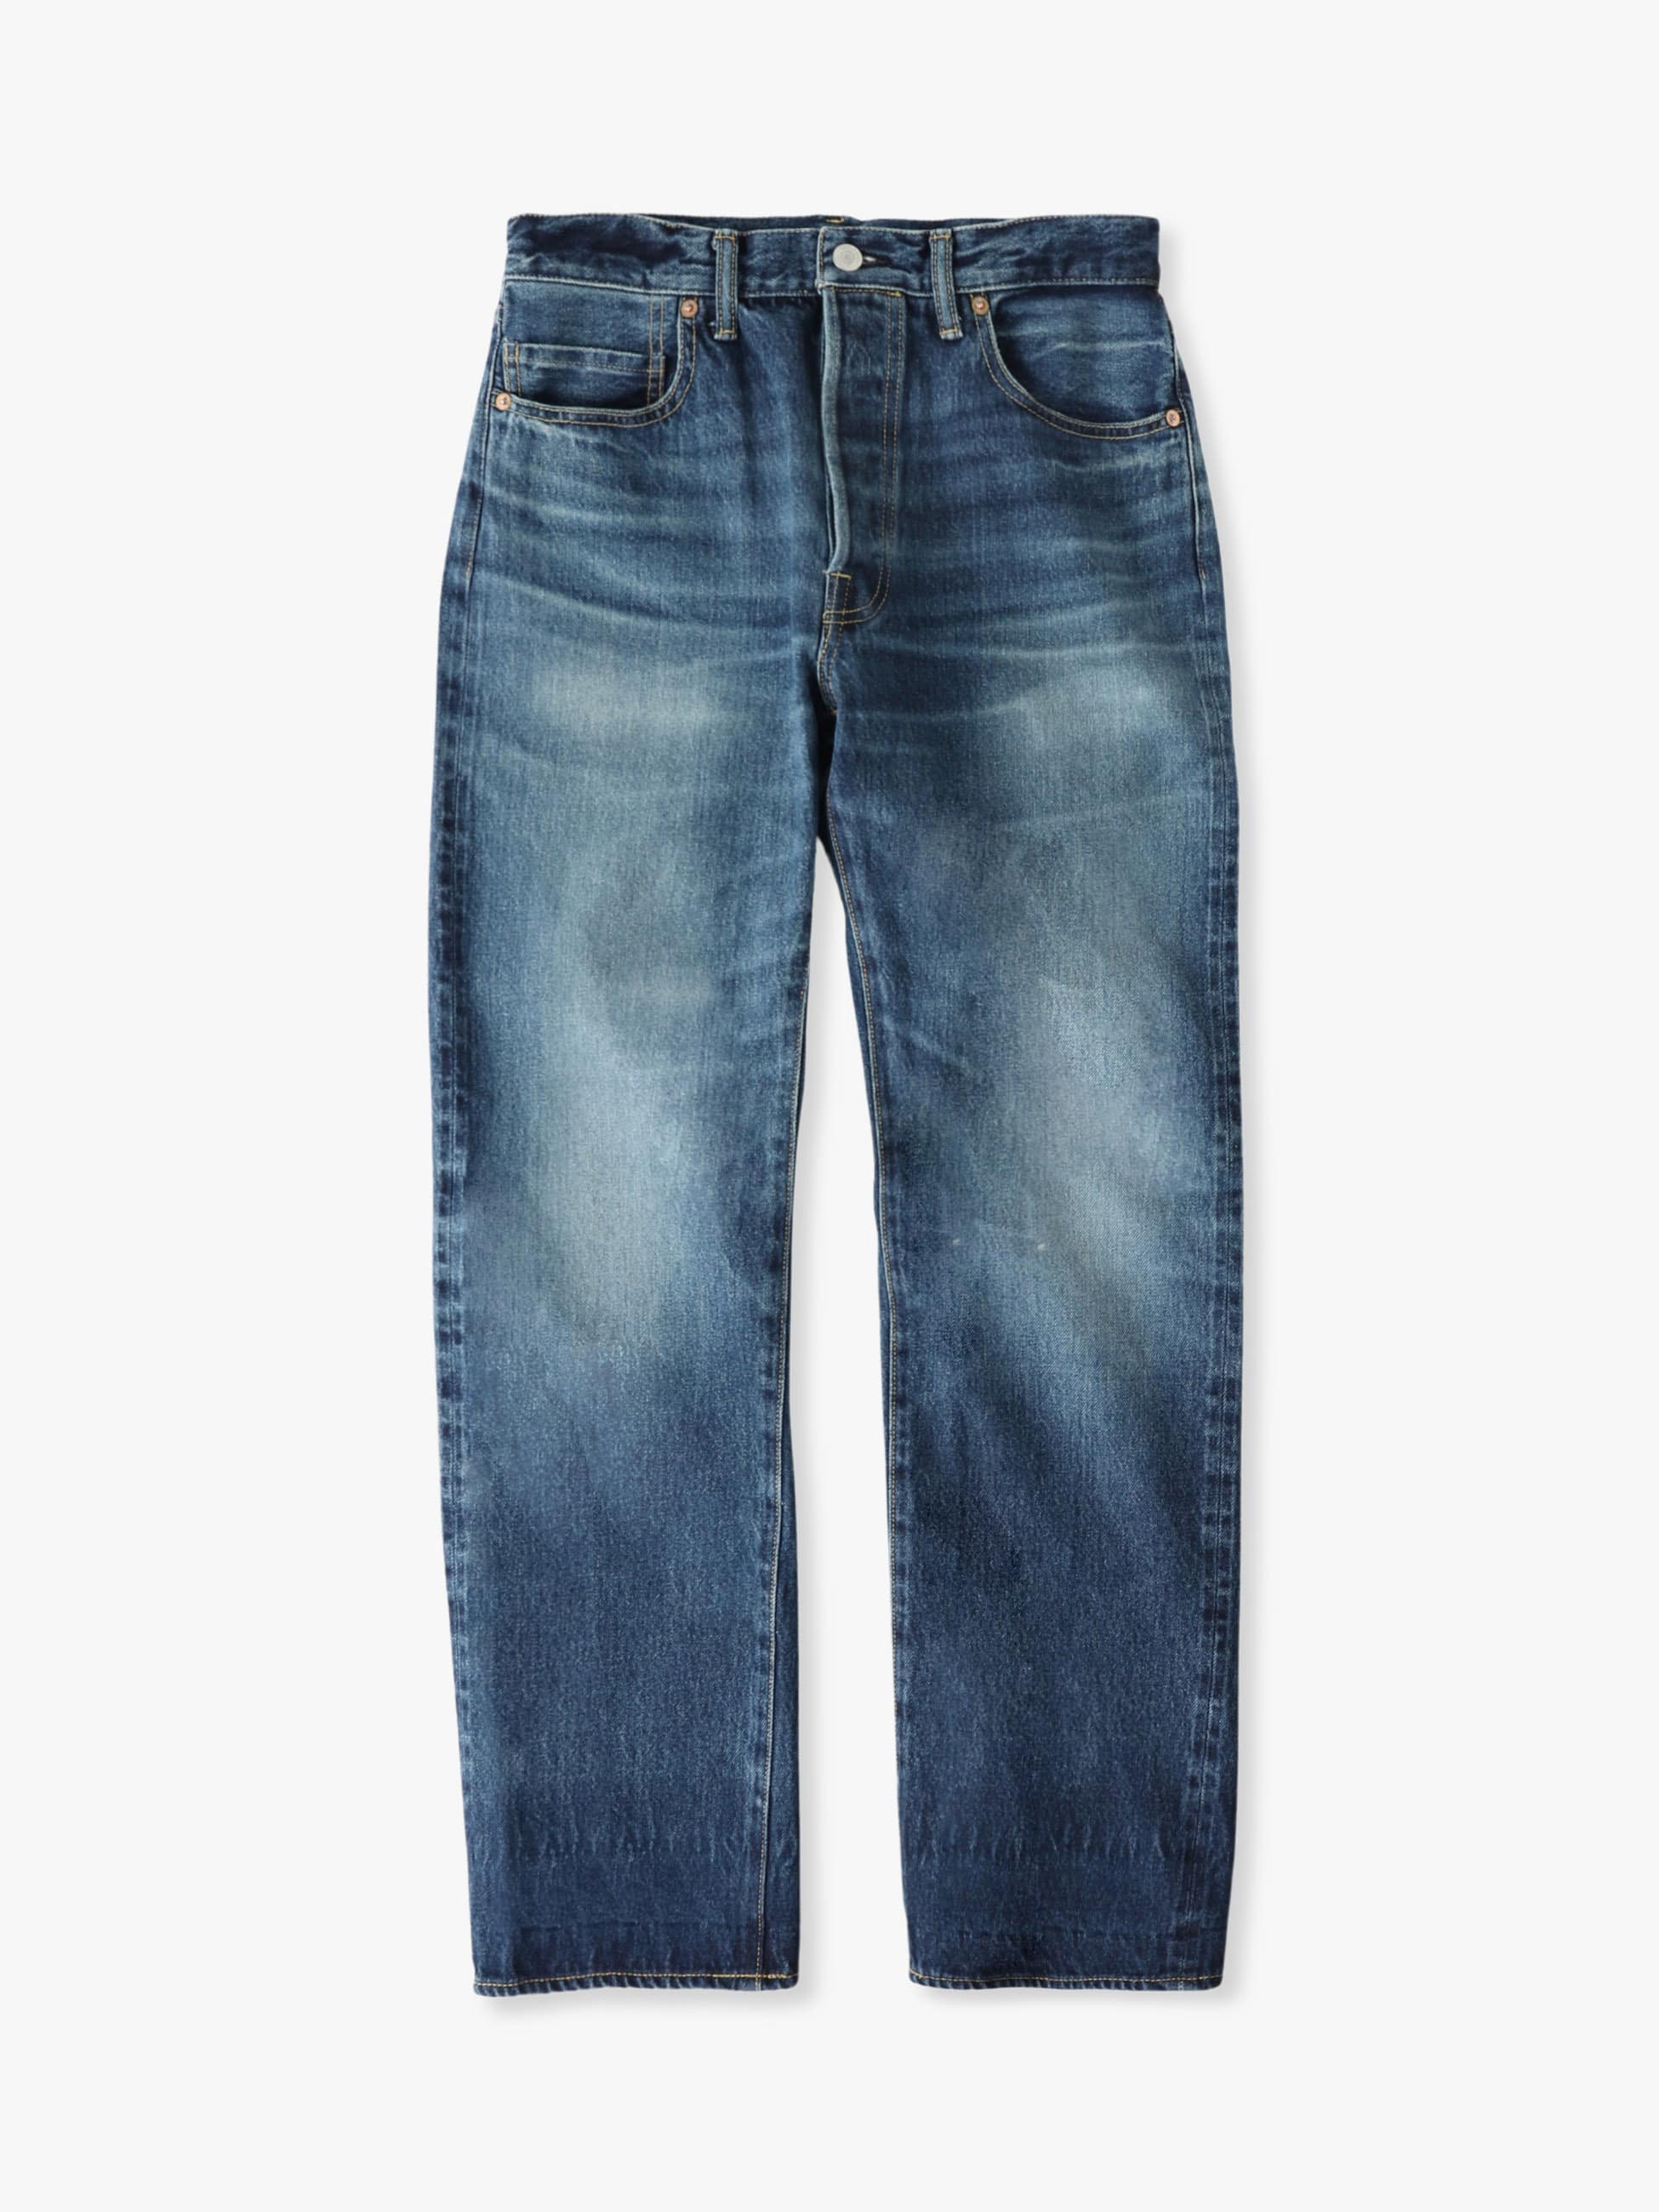 3years Aging Straight Fit Denim Pants